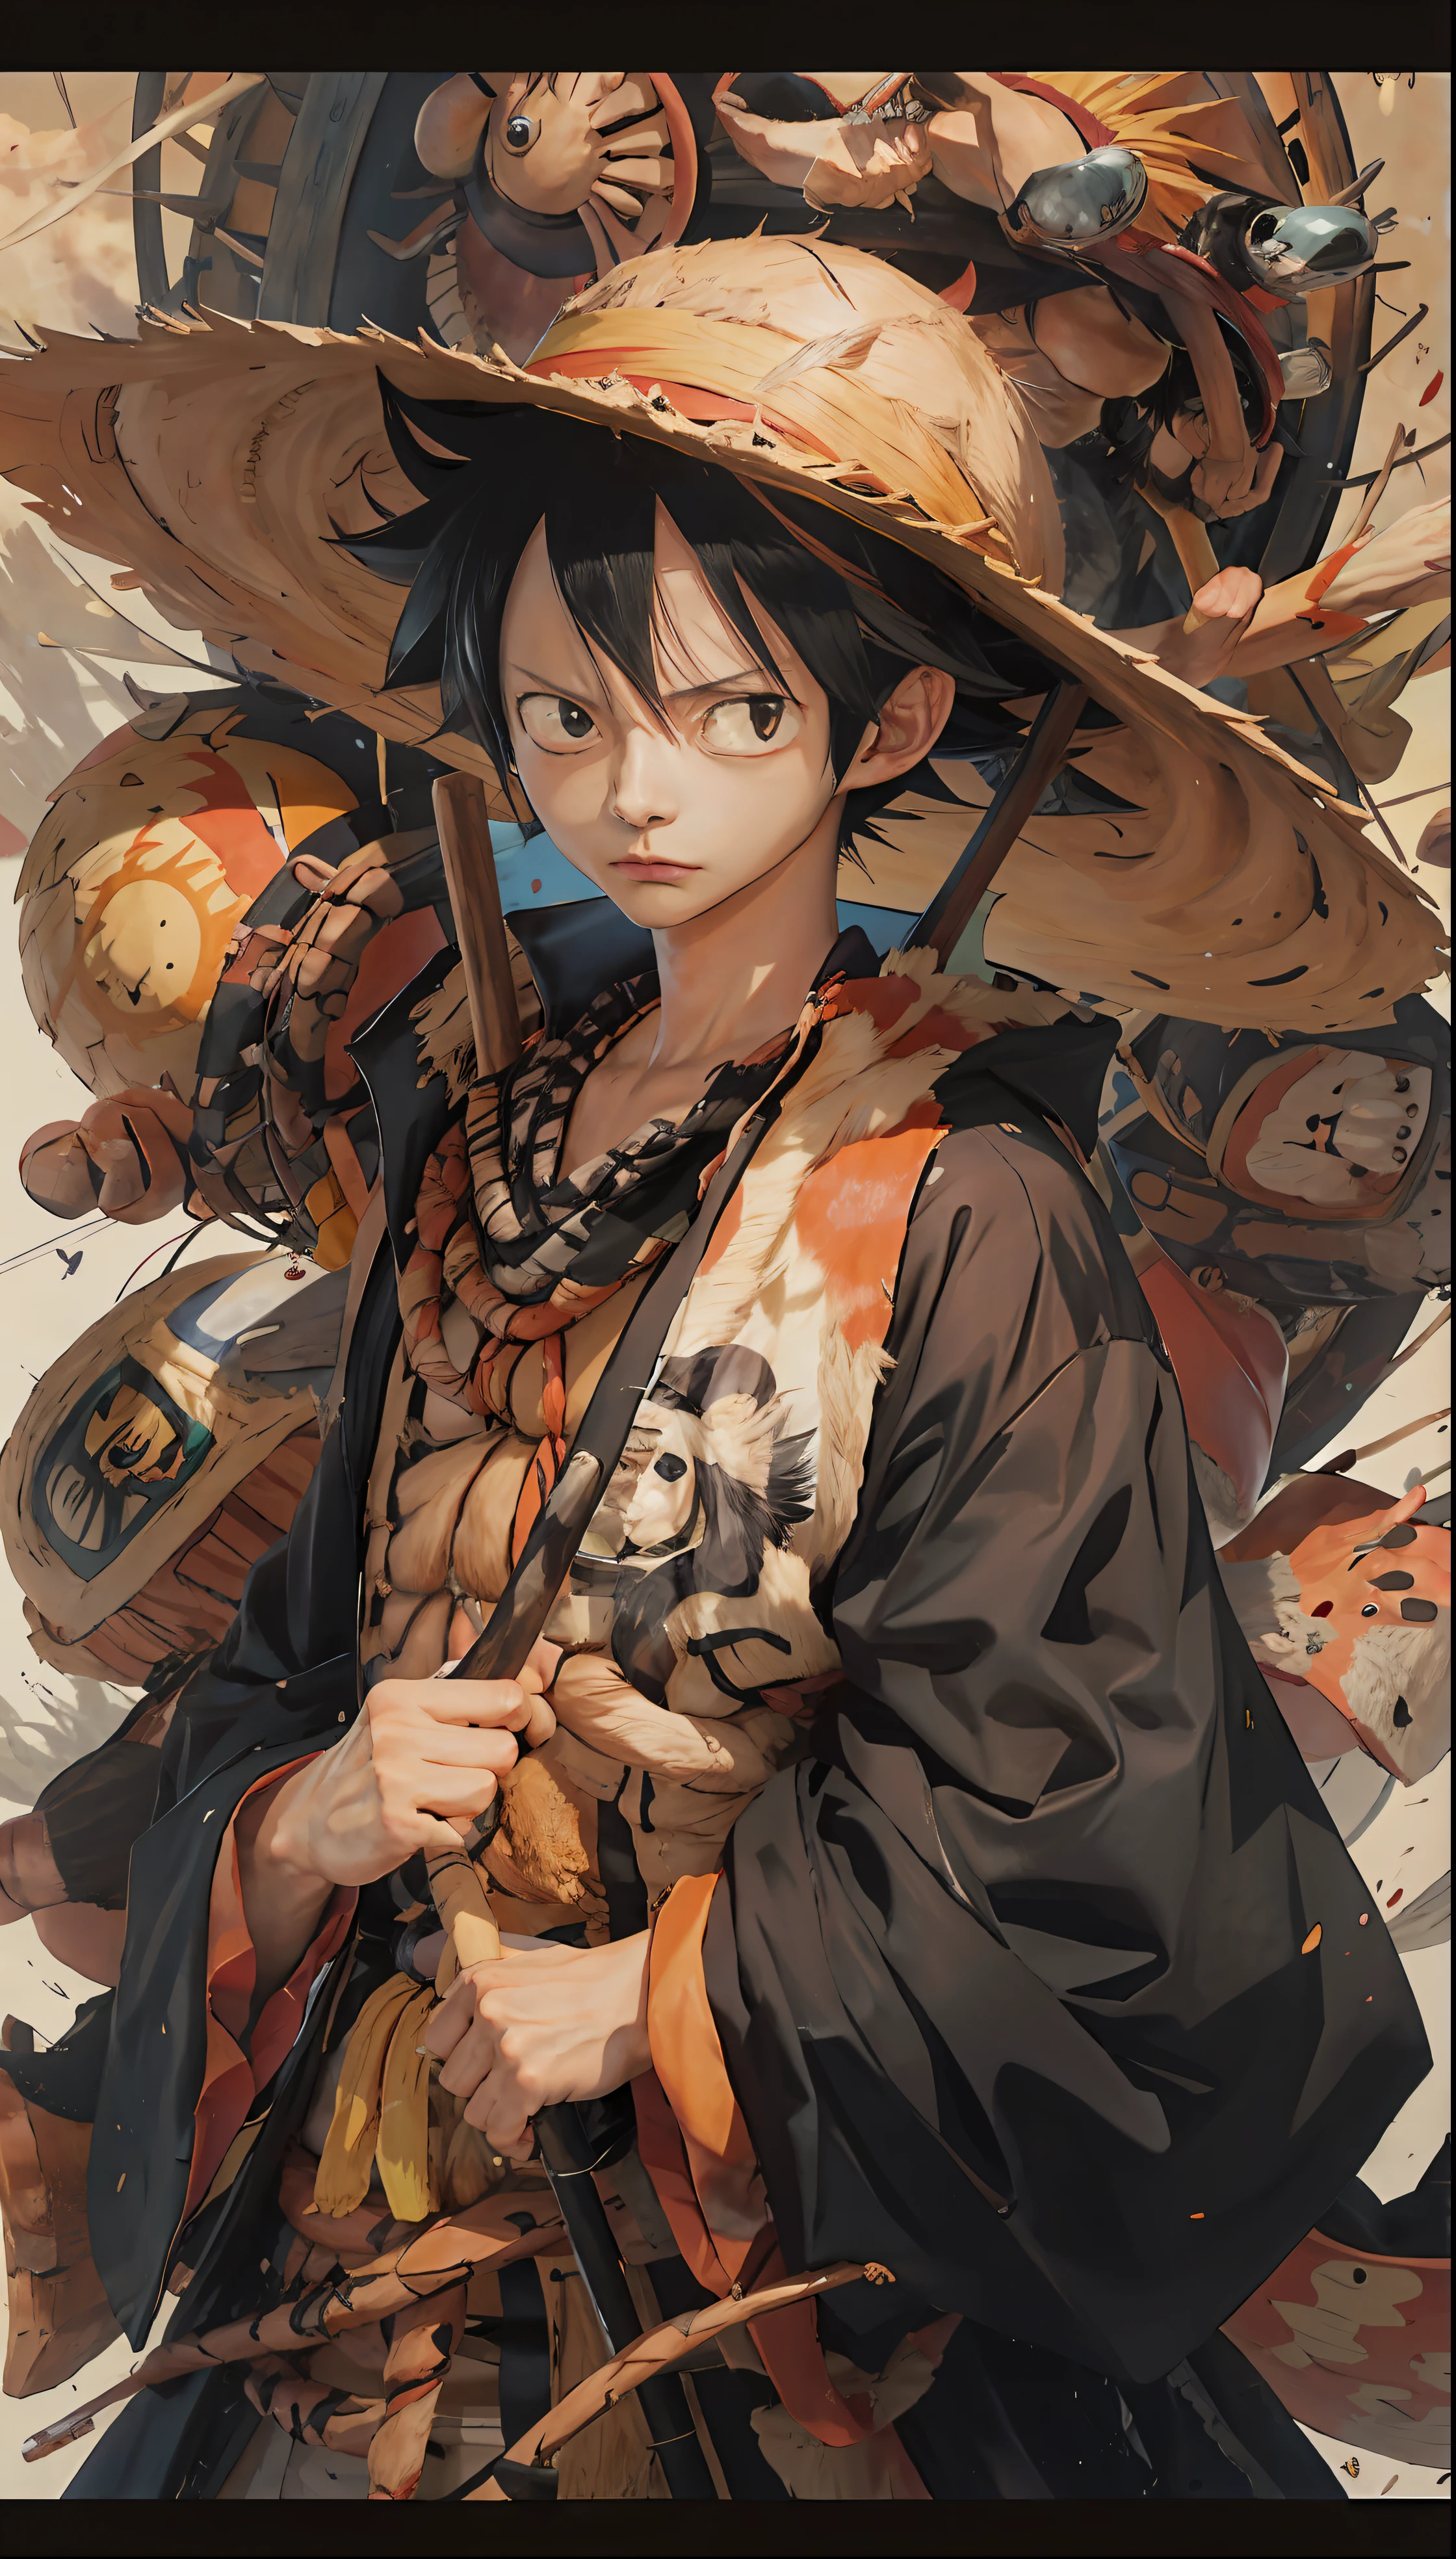 anime figure，With a hat and a large stick in his hand, inspired by Eiichiro Oda, Eiichiro Oda style, luffy dressed as naruto, style of eiichiro oda, trending anime artwork, Official anime artwork, author：Joichiro Oda, Trending anime art, clean and meticulous anime art, An anime cover, Luffy, Luffy (One Piece, offcial art, 4k manga wallpapers